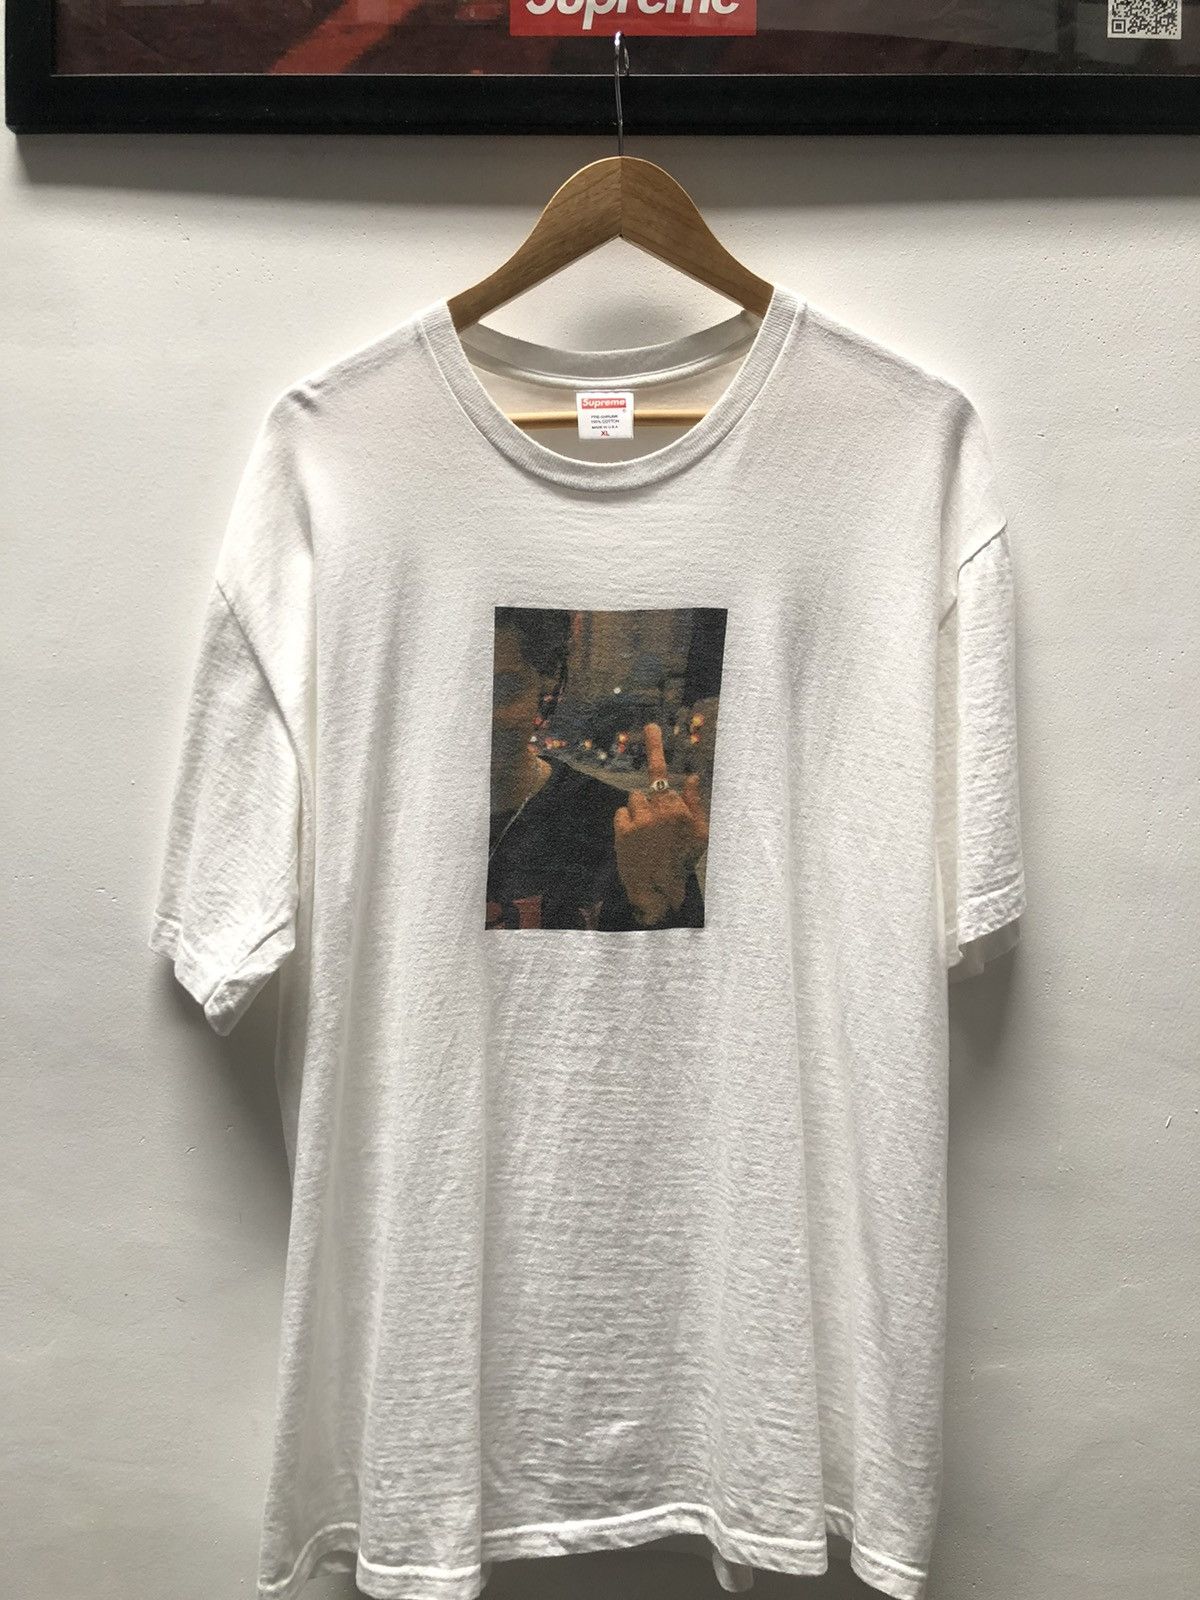 Supreme Supreme Blessed tee white XL SS2018 | Grailed